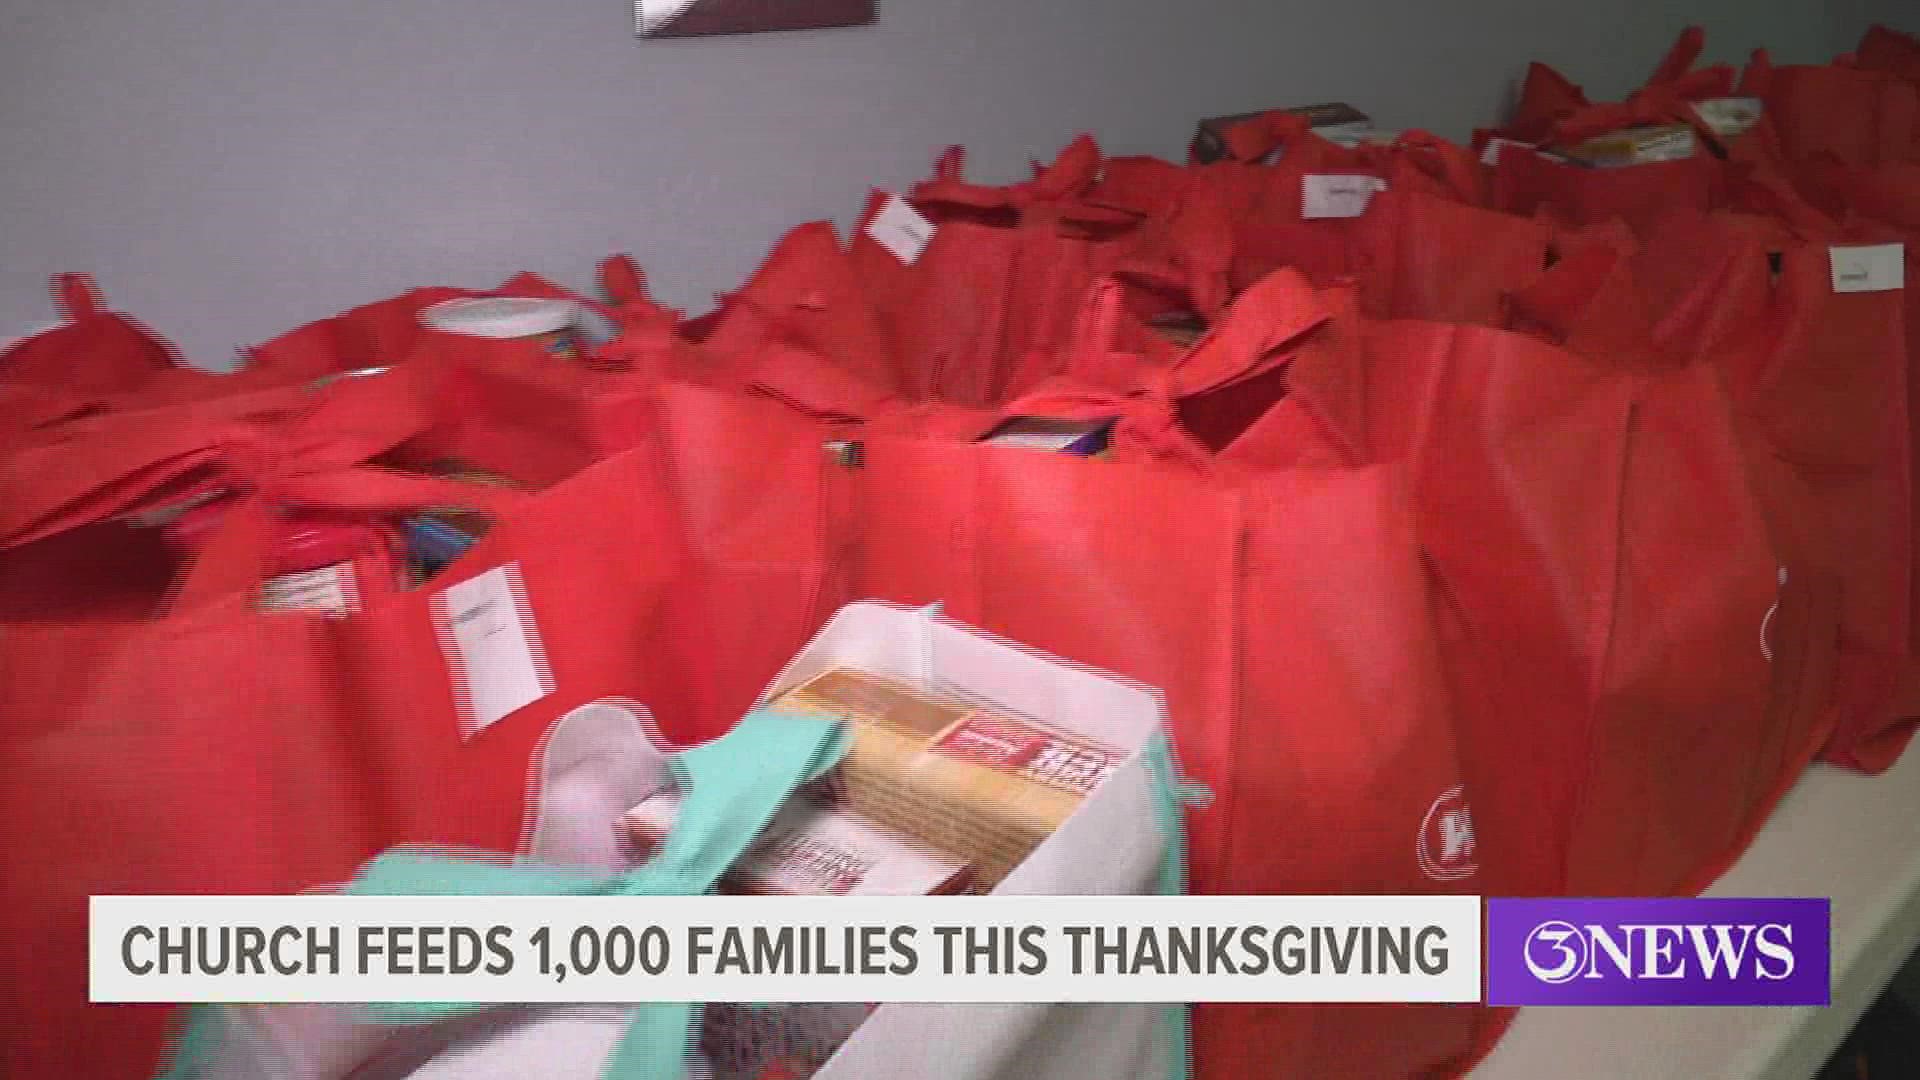 Asbury United Methodist Church wants to be sure no family goes without a Thanksgiving meal this year, and they need your help.